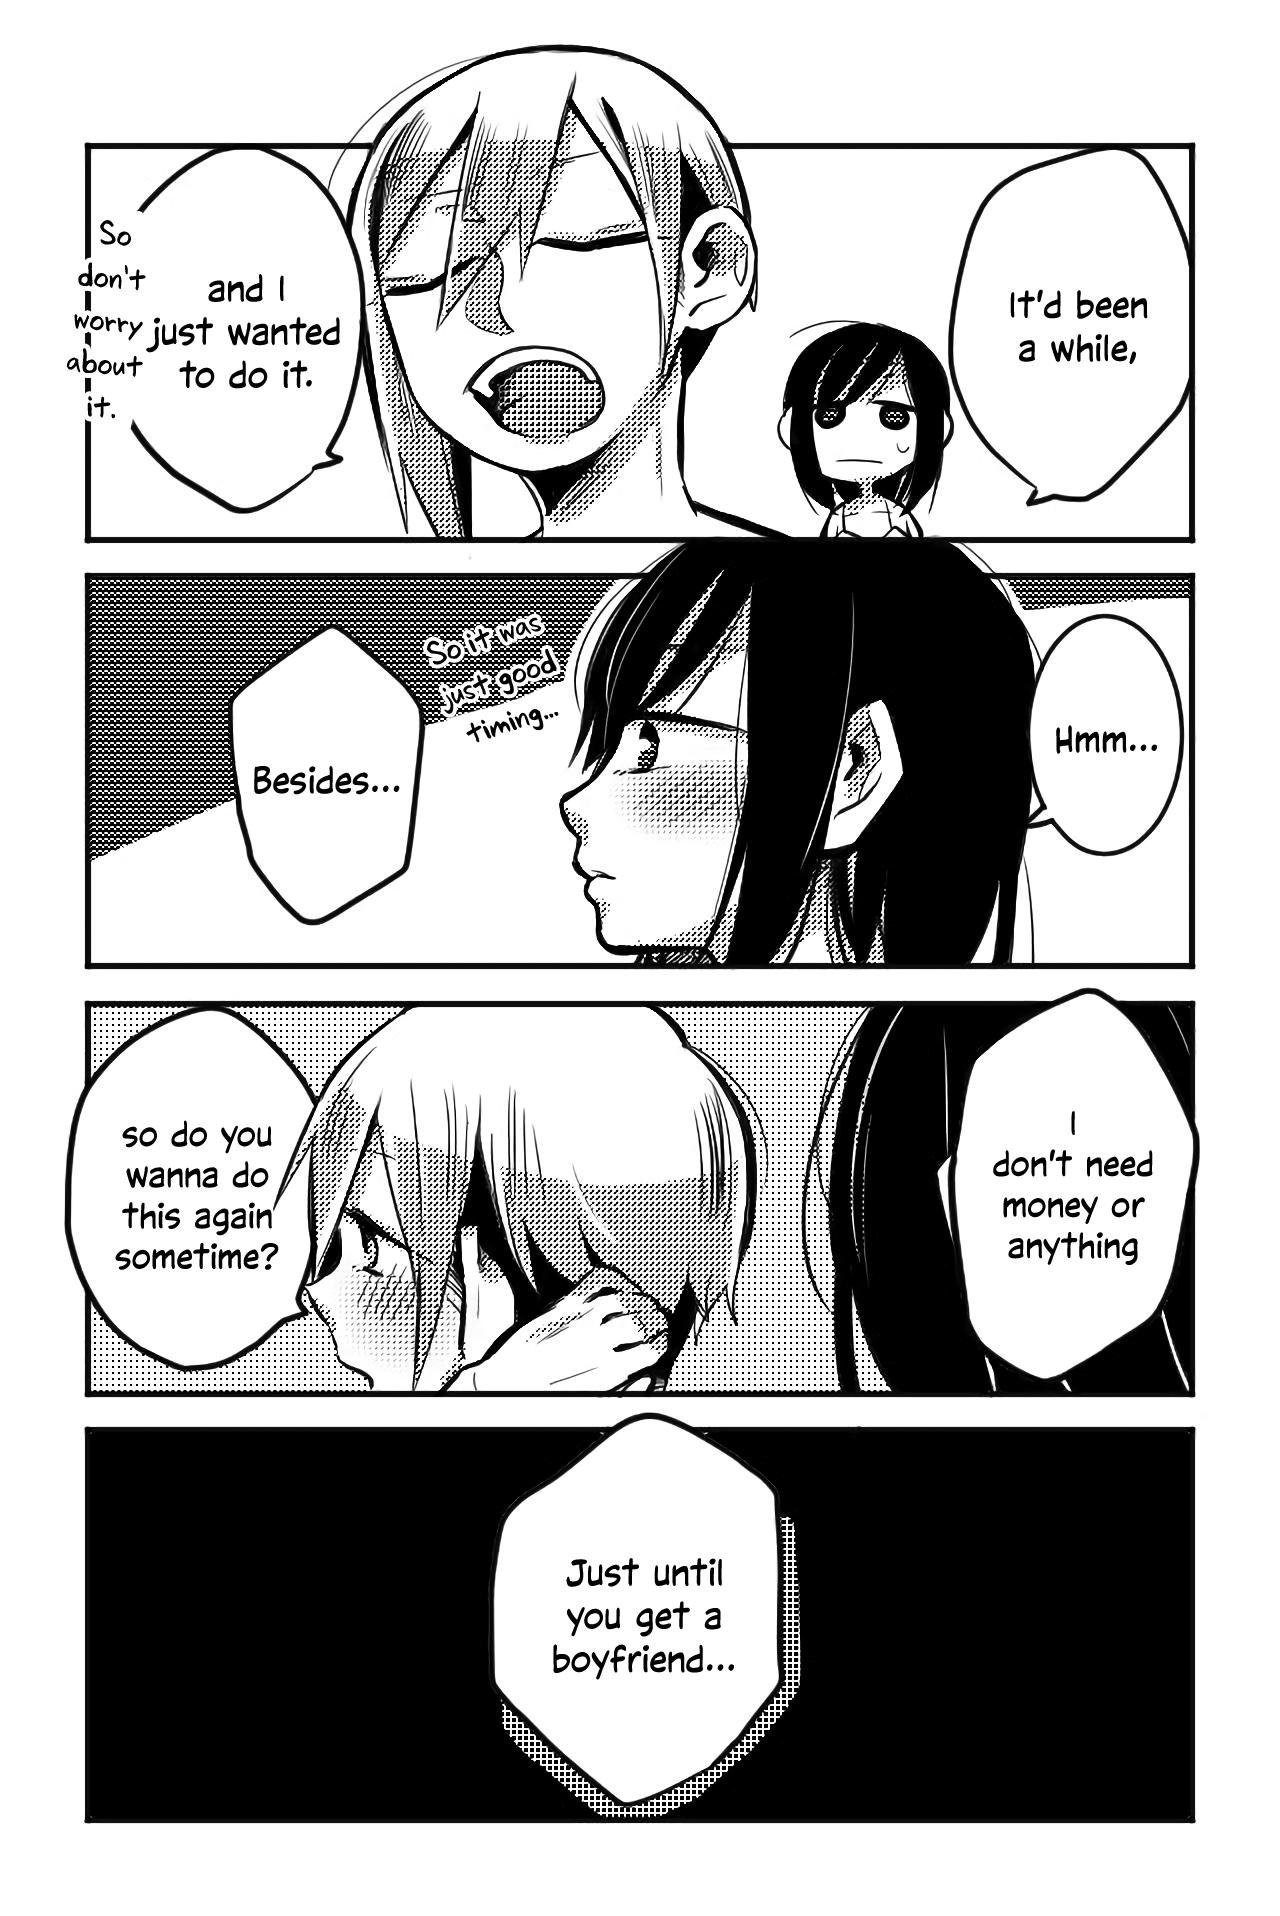 Old We can't go back to being friends | Tomodachi ni nante modorenai - Original Hot Naked Women - Page 13